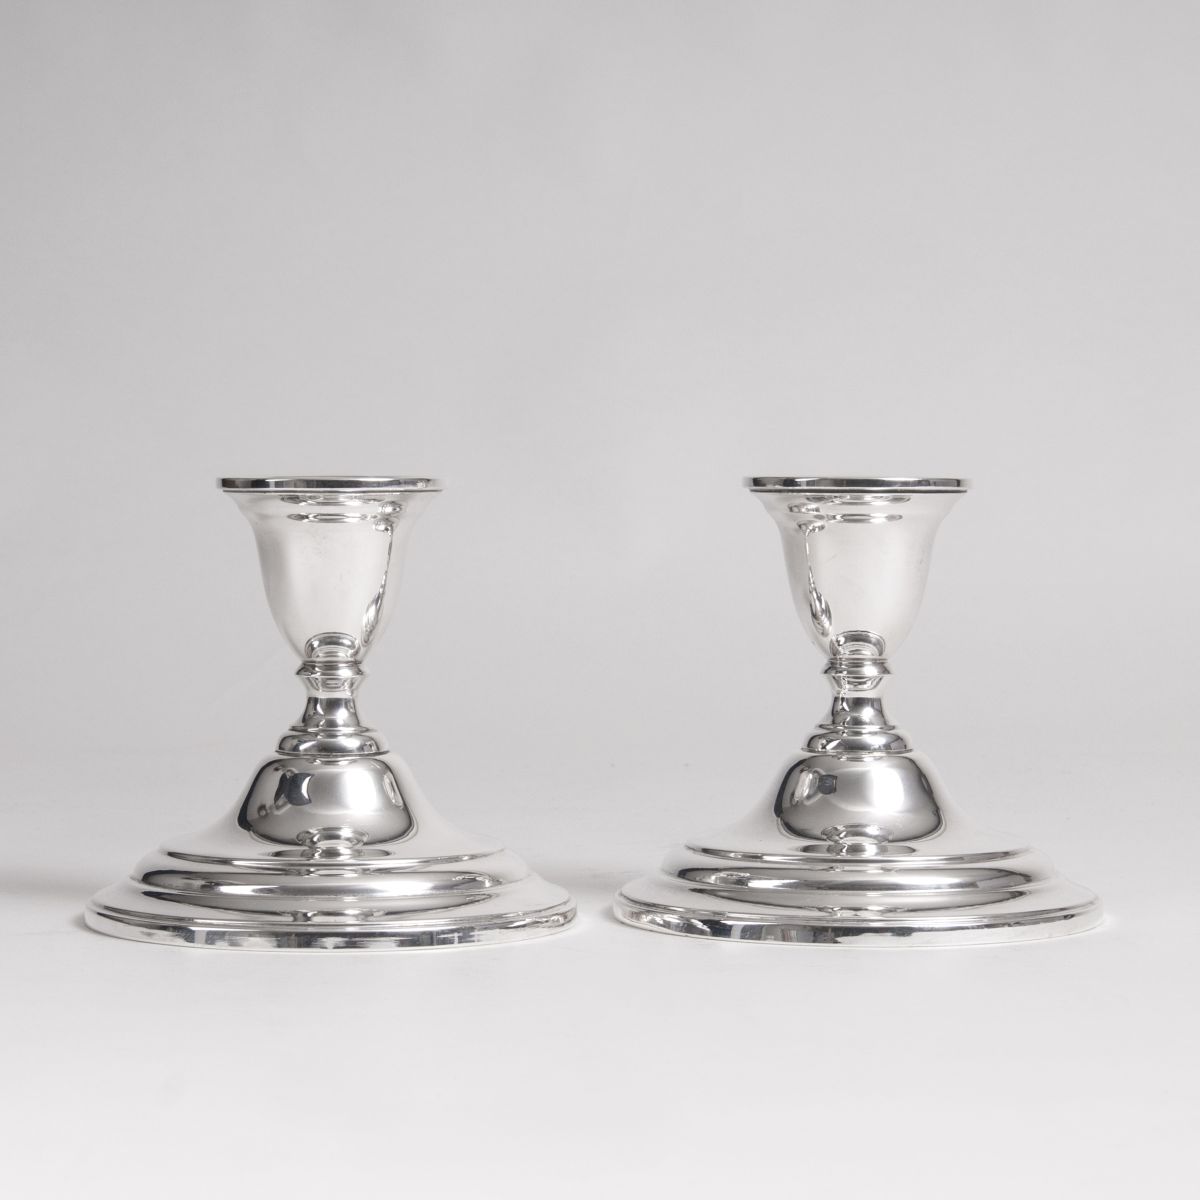 A pair of small American candlesticks